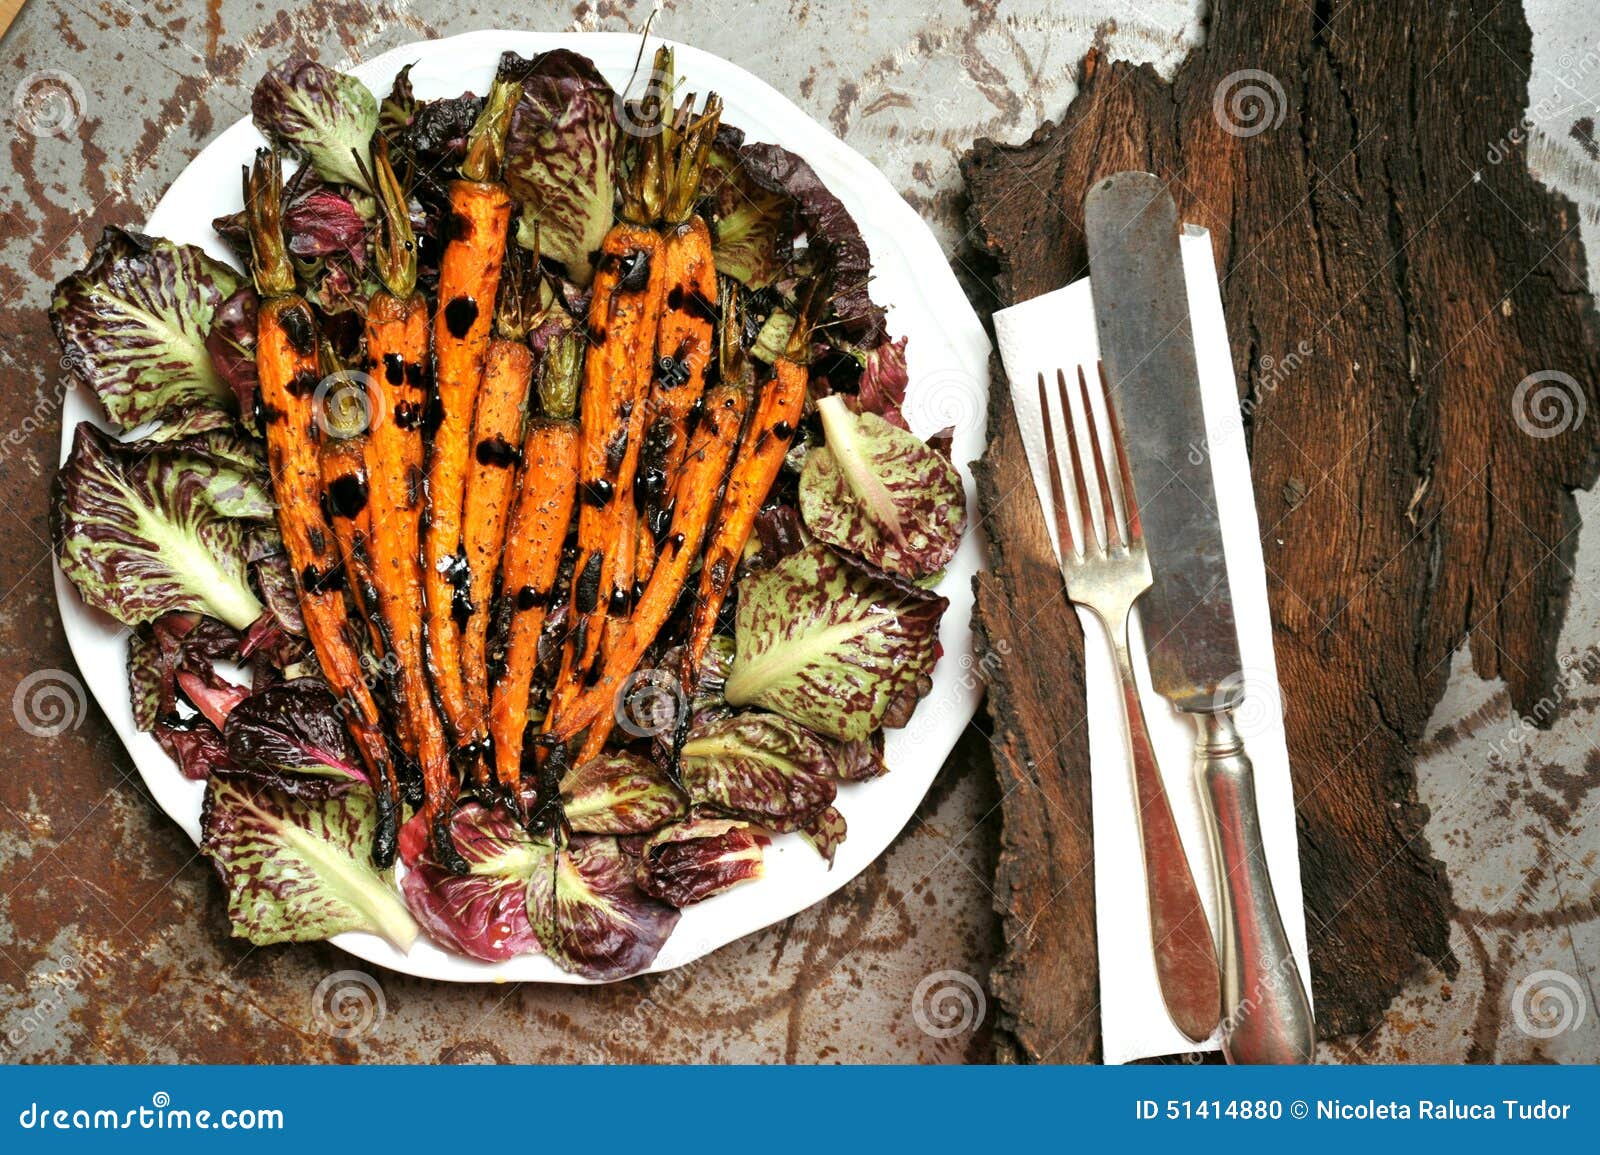 vegan meal with grilled carrots and bitter salad